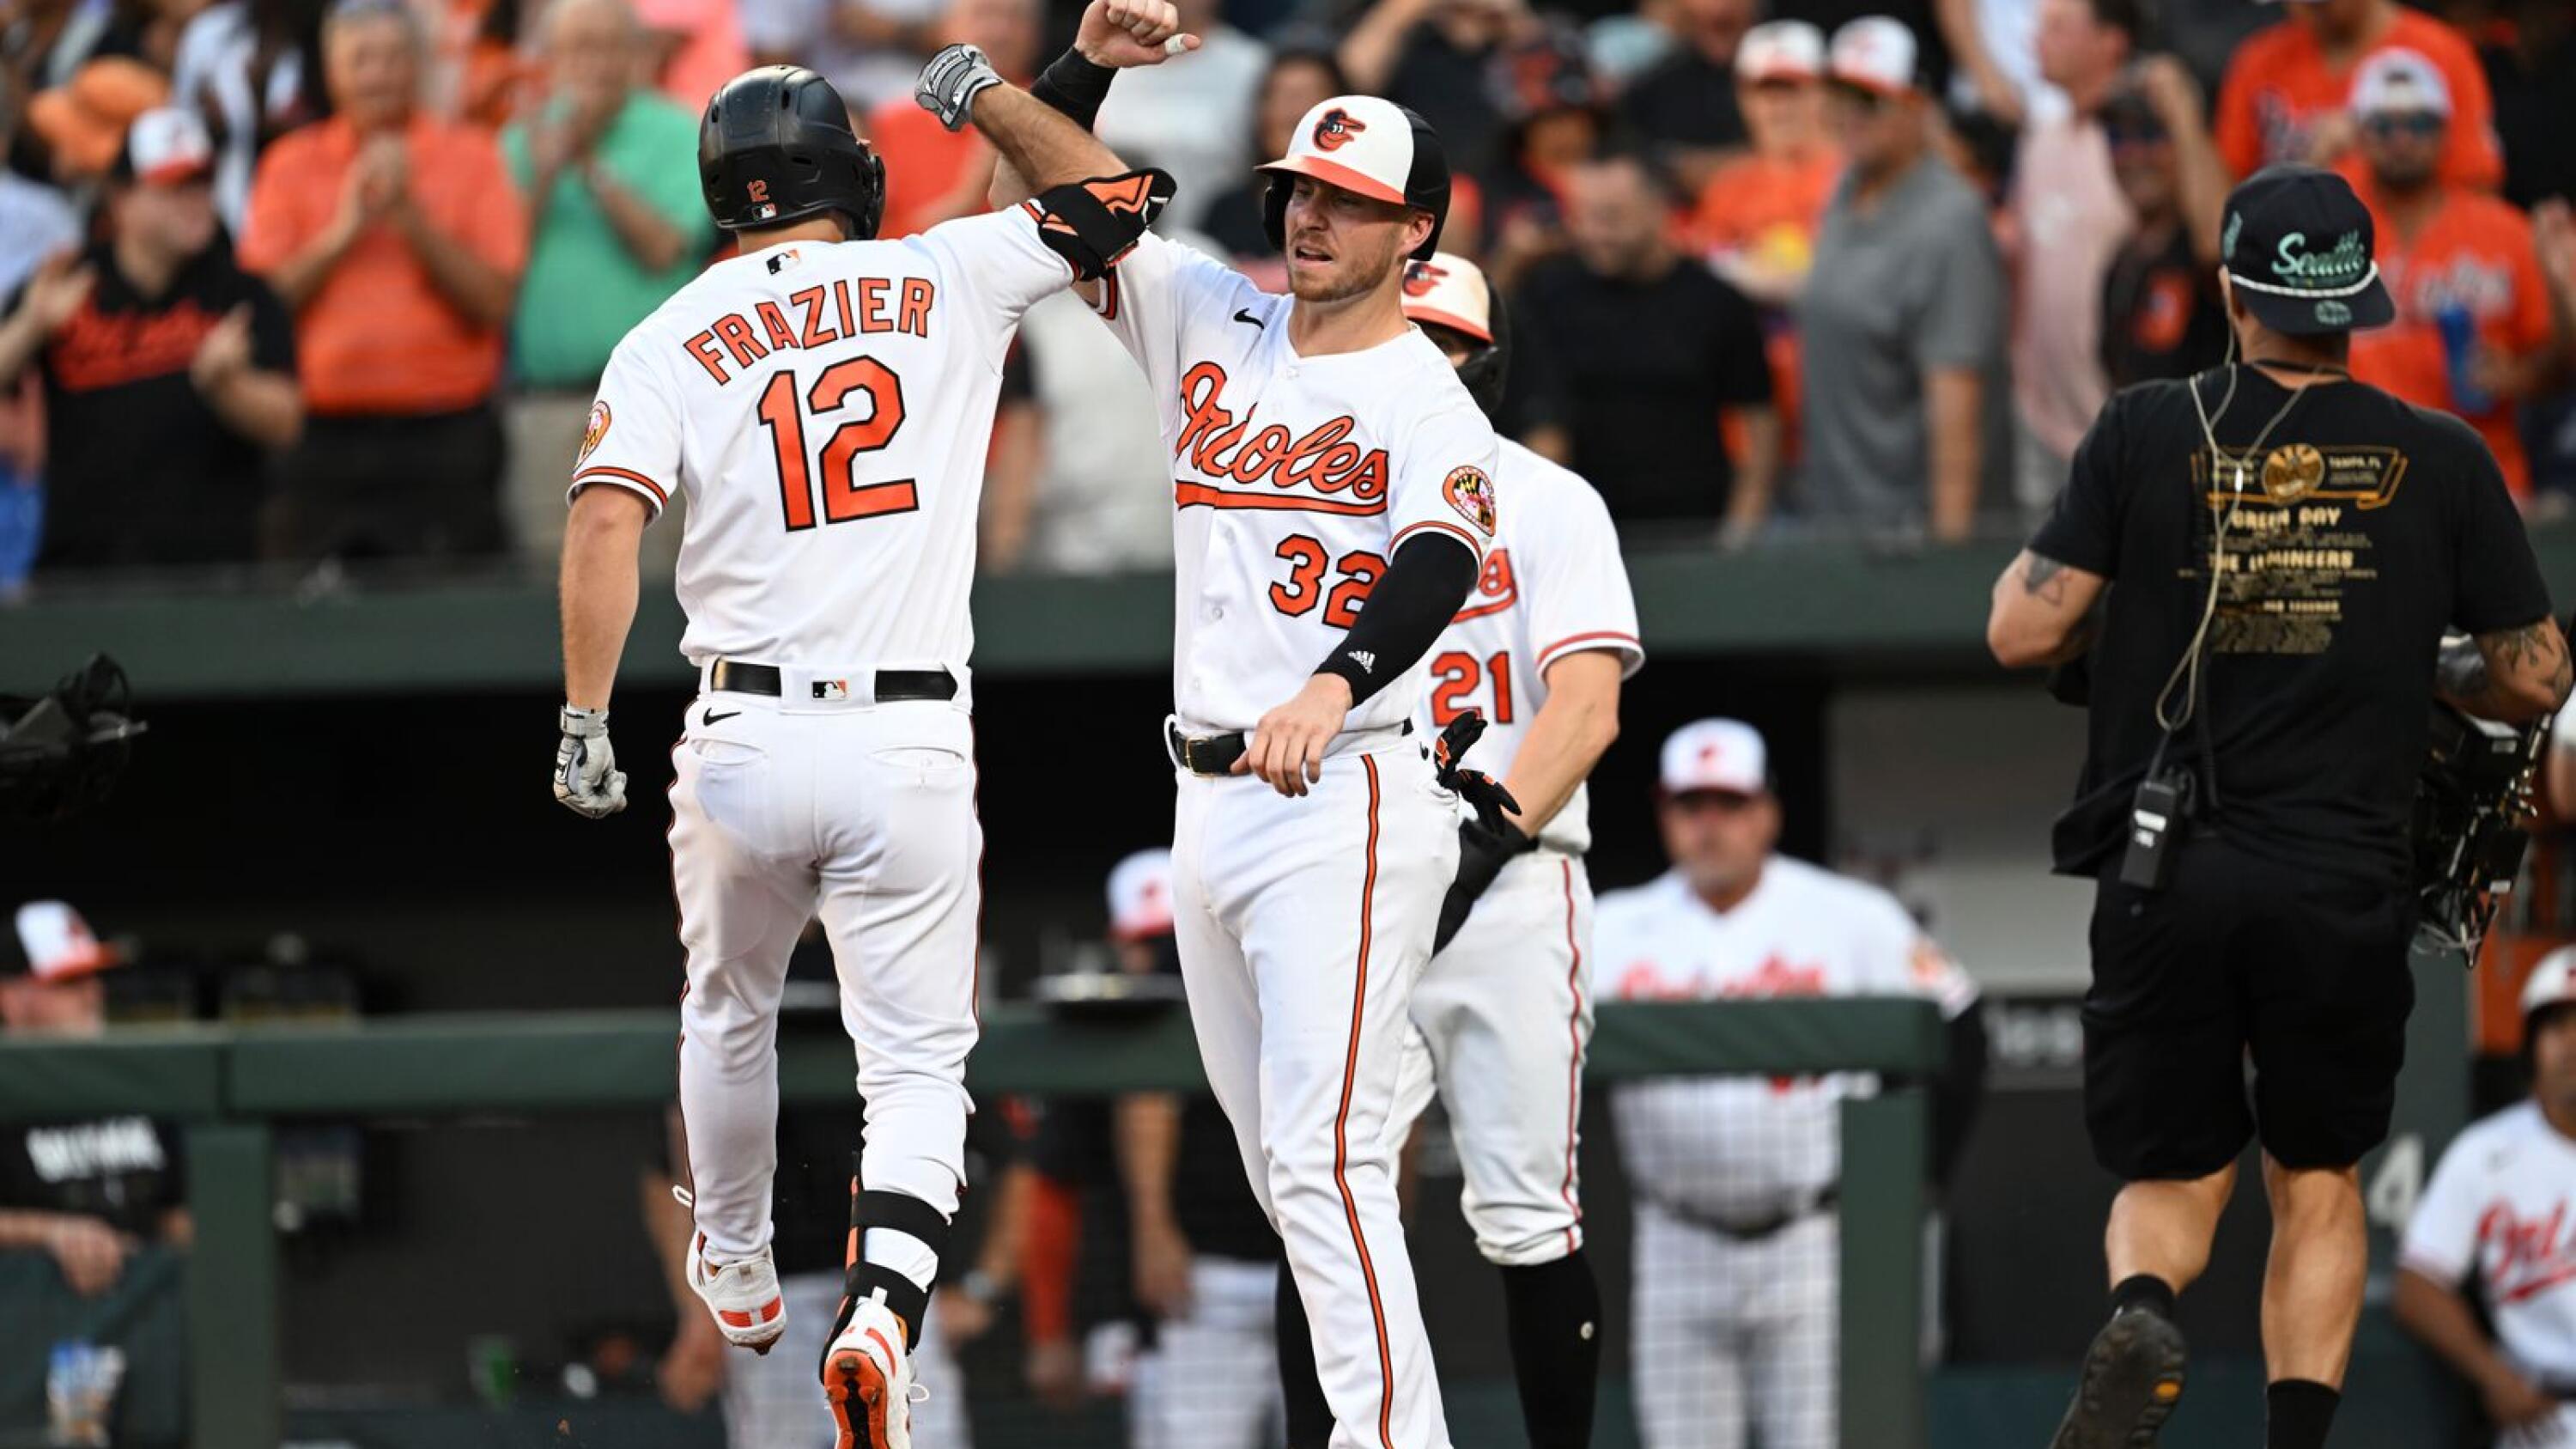 Orioles score 7 runs in 1st inning, pound the Yankees 9-3